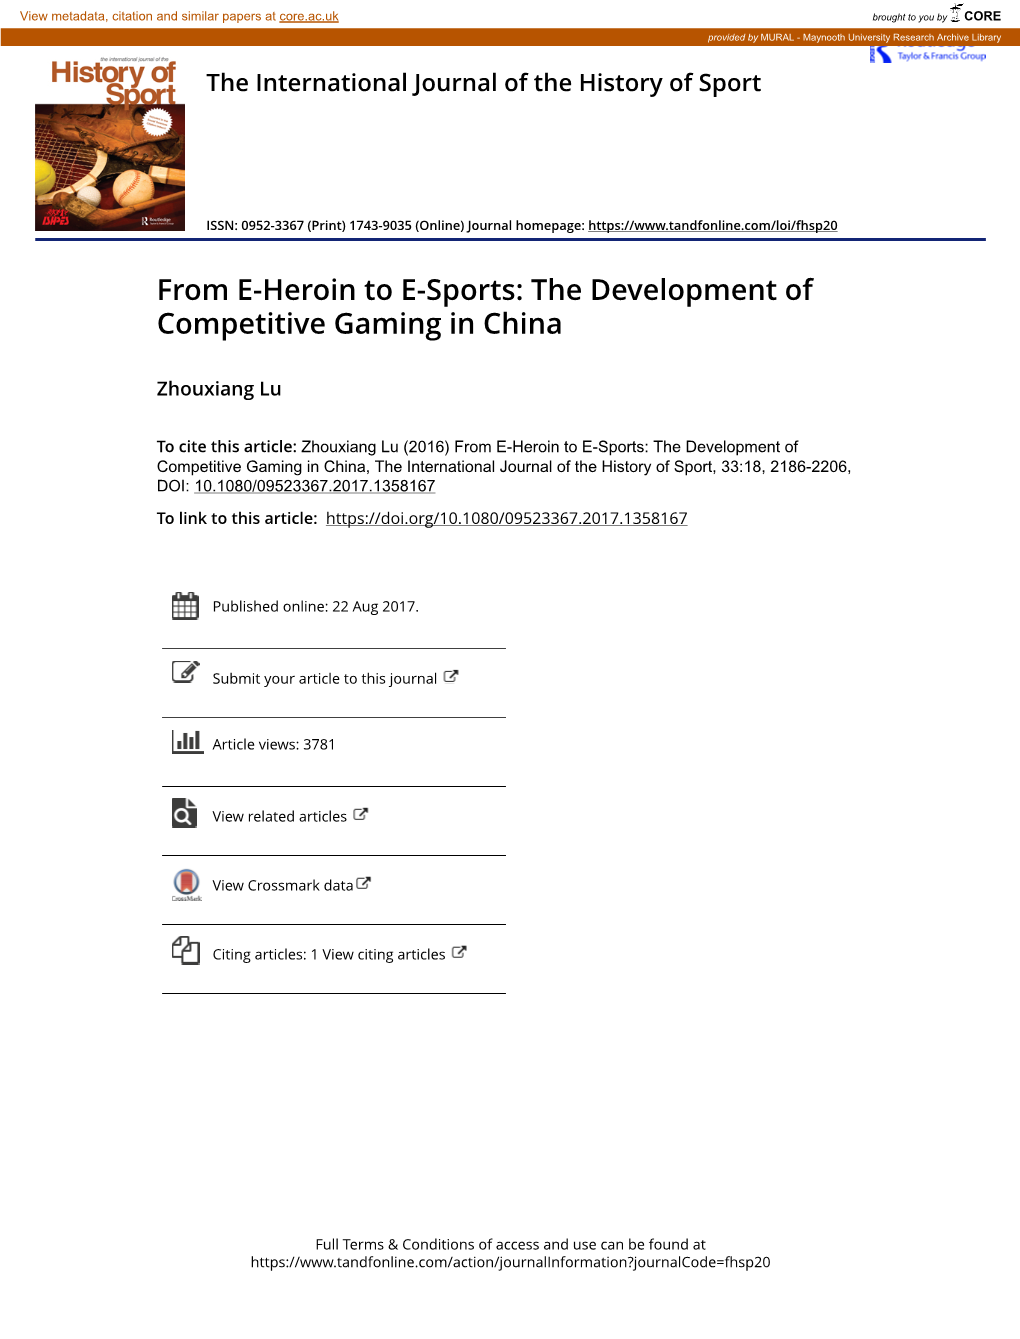 The Development of Competitive Gaming in China